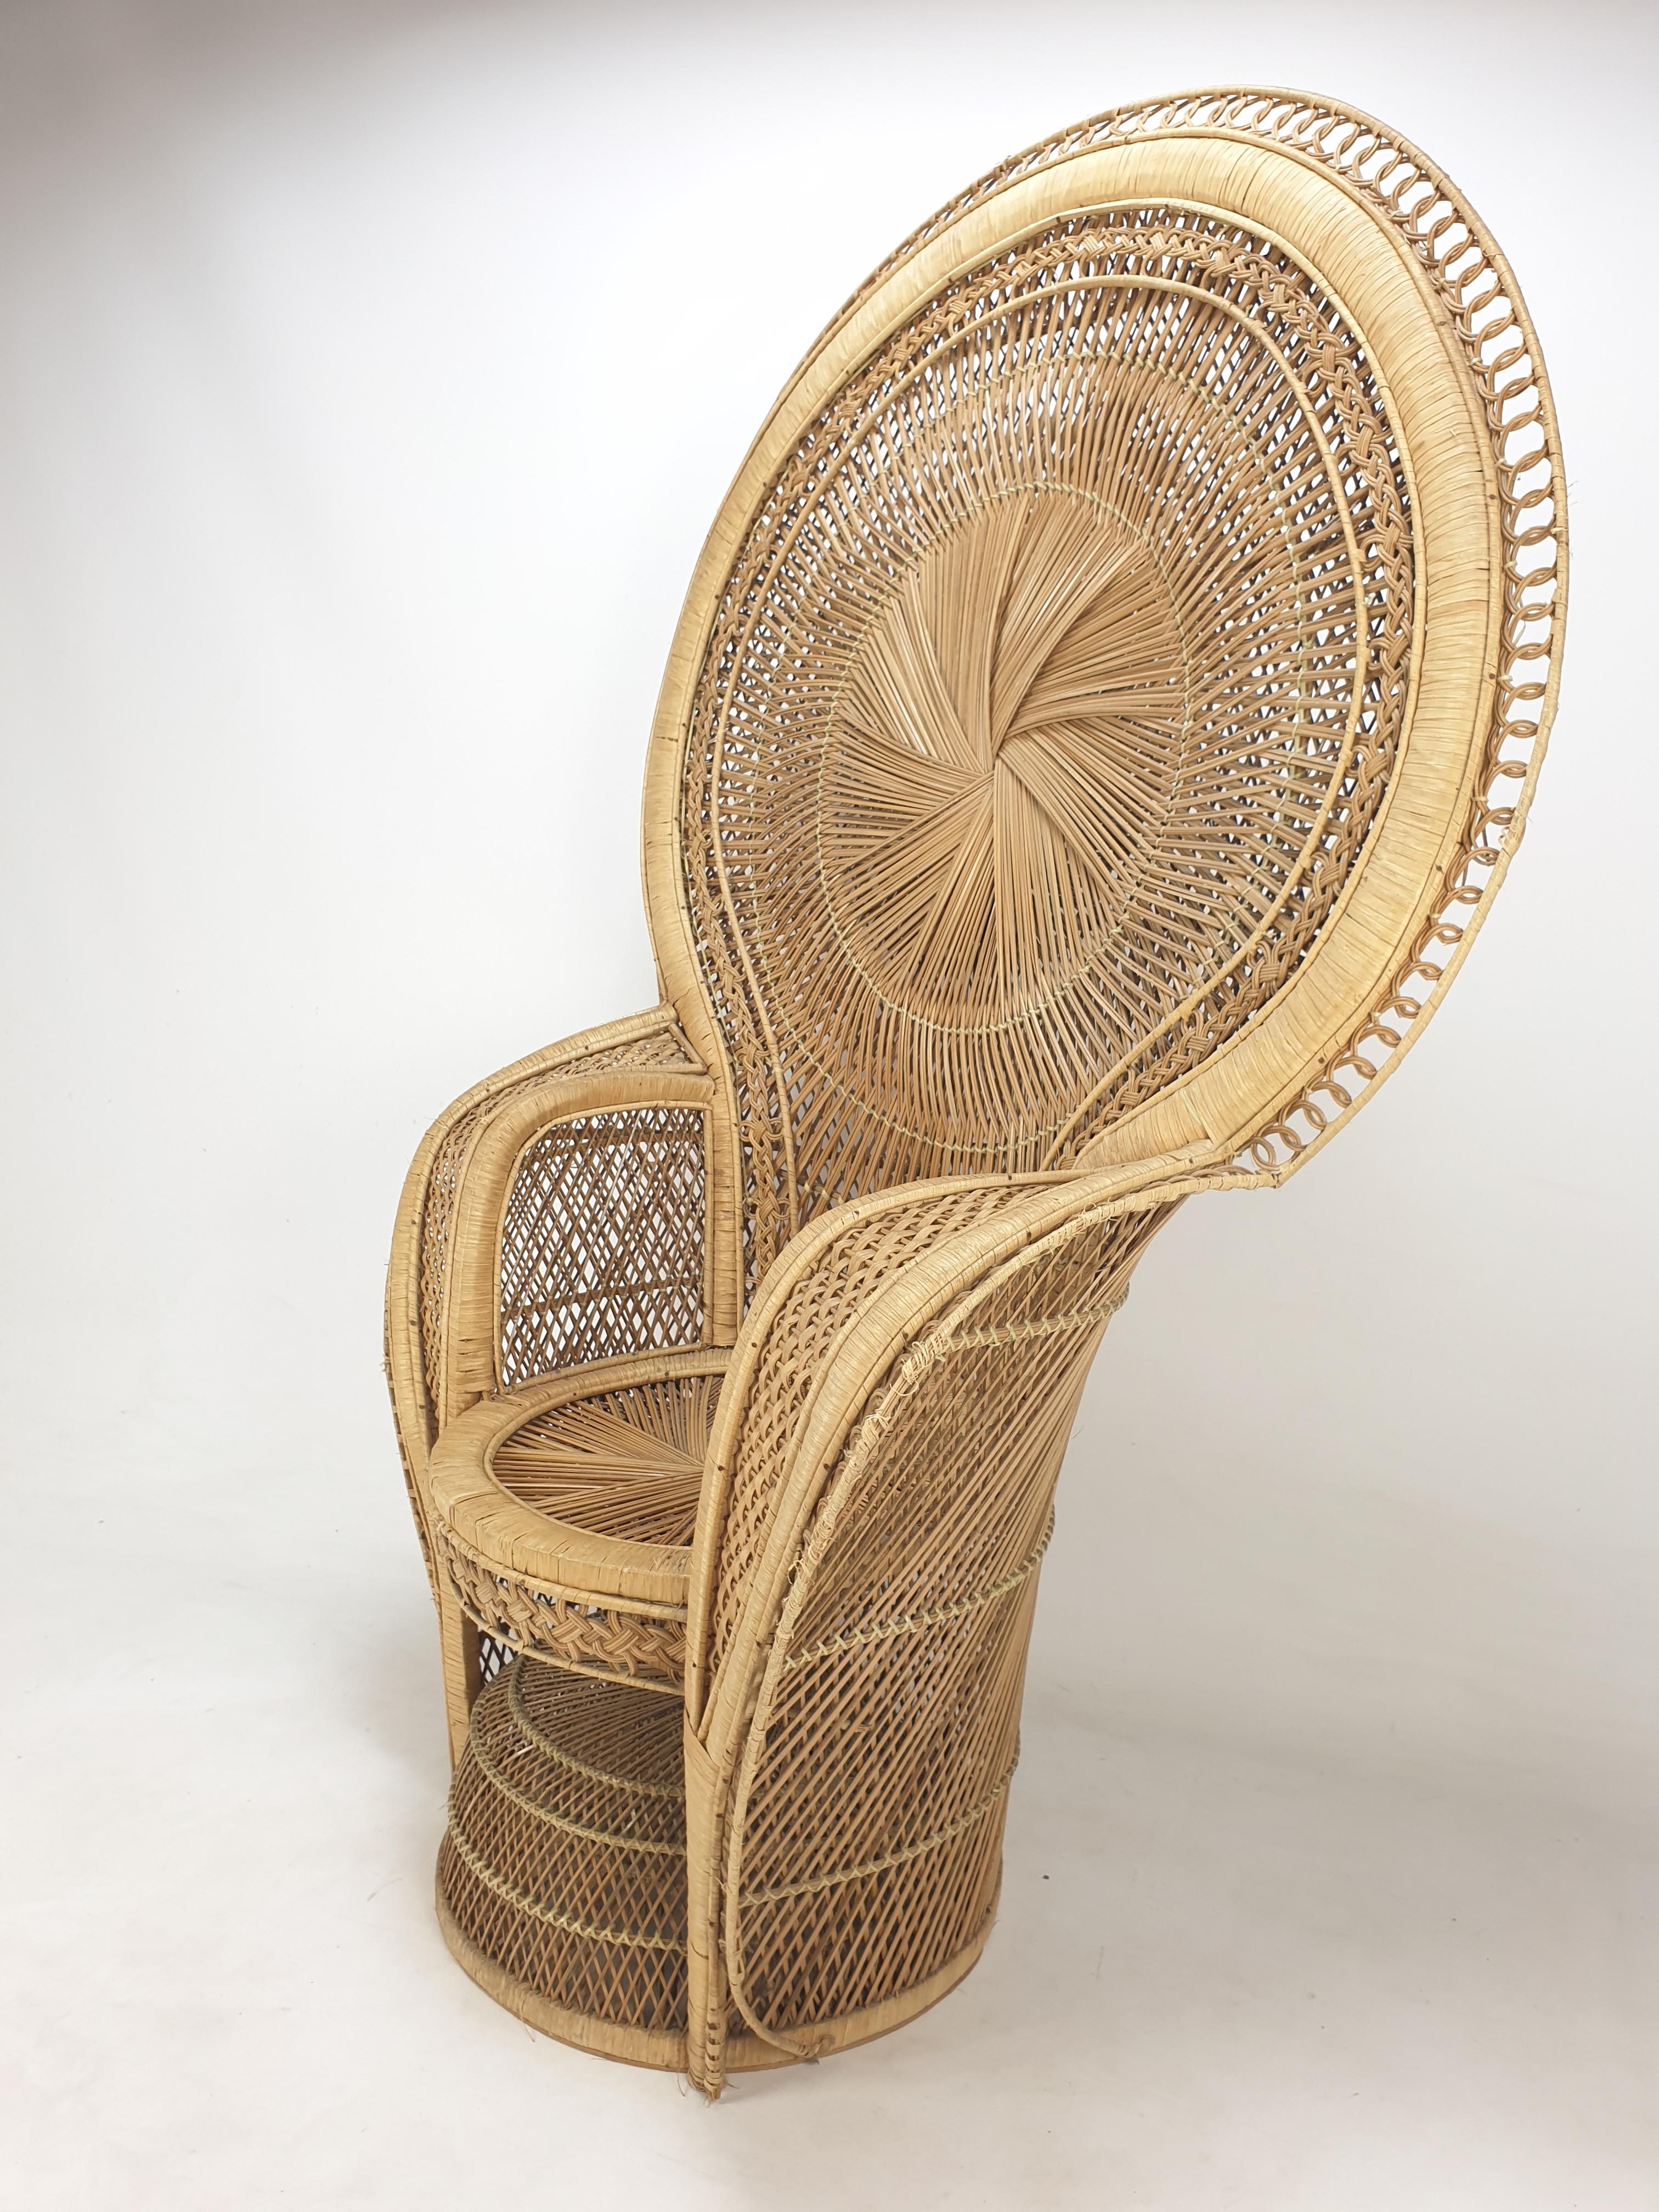 Mid-20th Century Midcentury Emmanuelle or Peacock Rattan and Wicker Chair, Italy 1960s For Sale